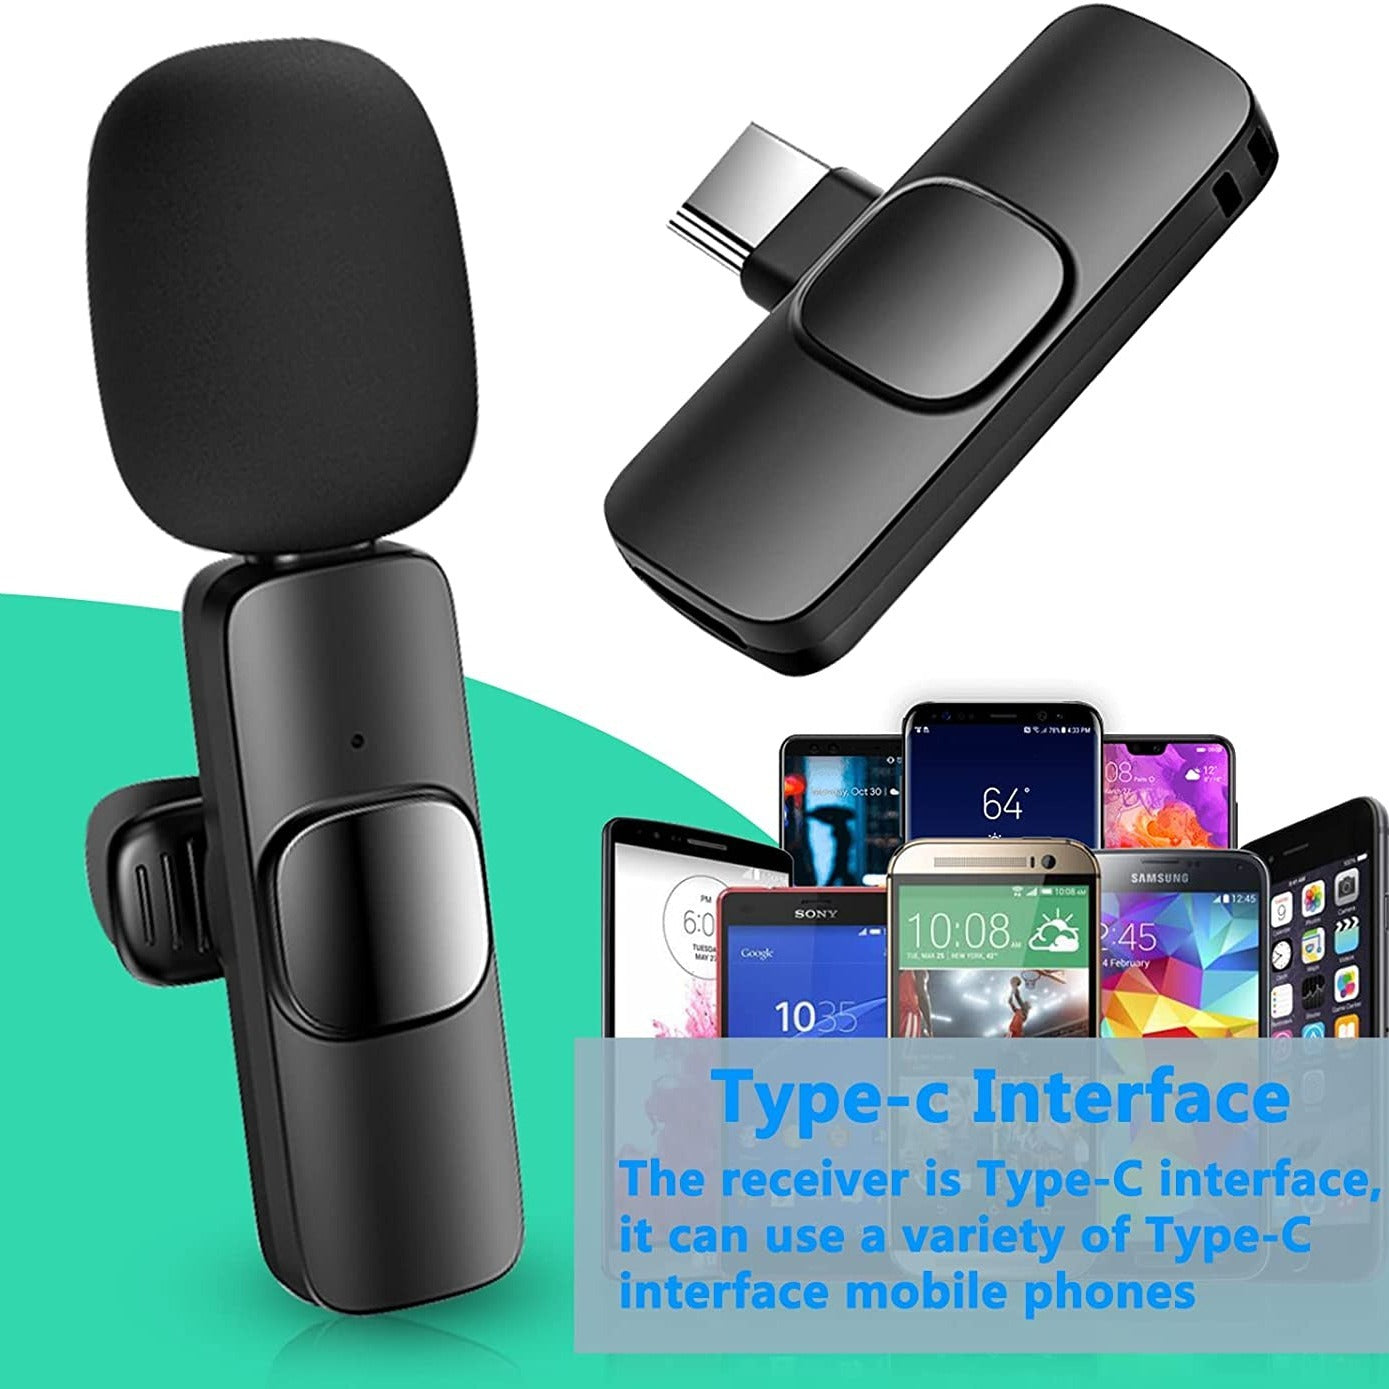 Microphone-Wireless Lavalier Lapel Microphone For iPhone iPad Professional Wireless Clip Mic - Cordless Omnidirectional Condenser Recording Mic For Interview Video Podcast Vlog YouTube